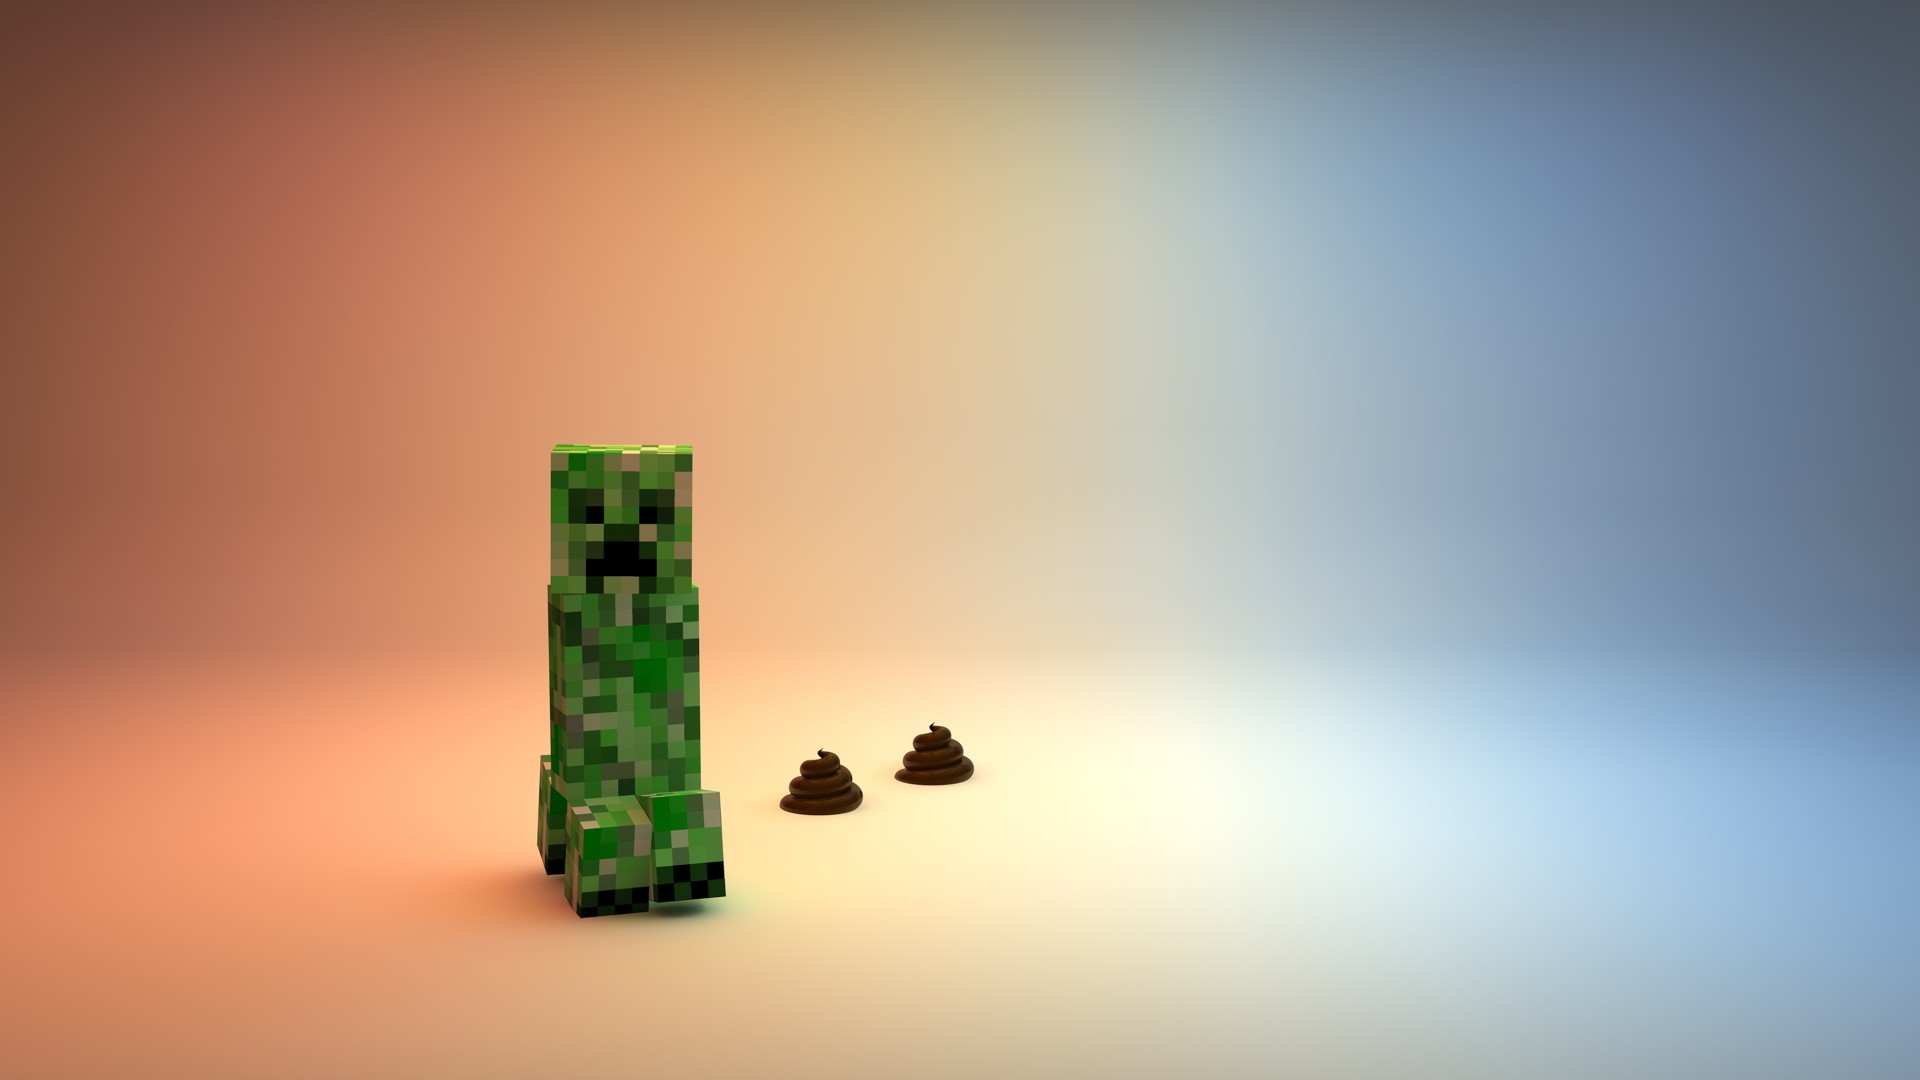 1920x1080 Minecraft-Backgrounds-Picture-Group-%C3%97-Minecraft-Backgrounds